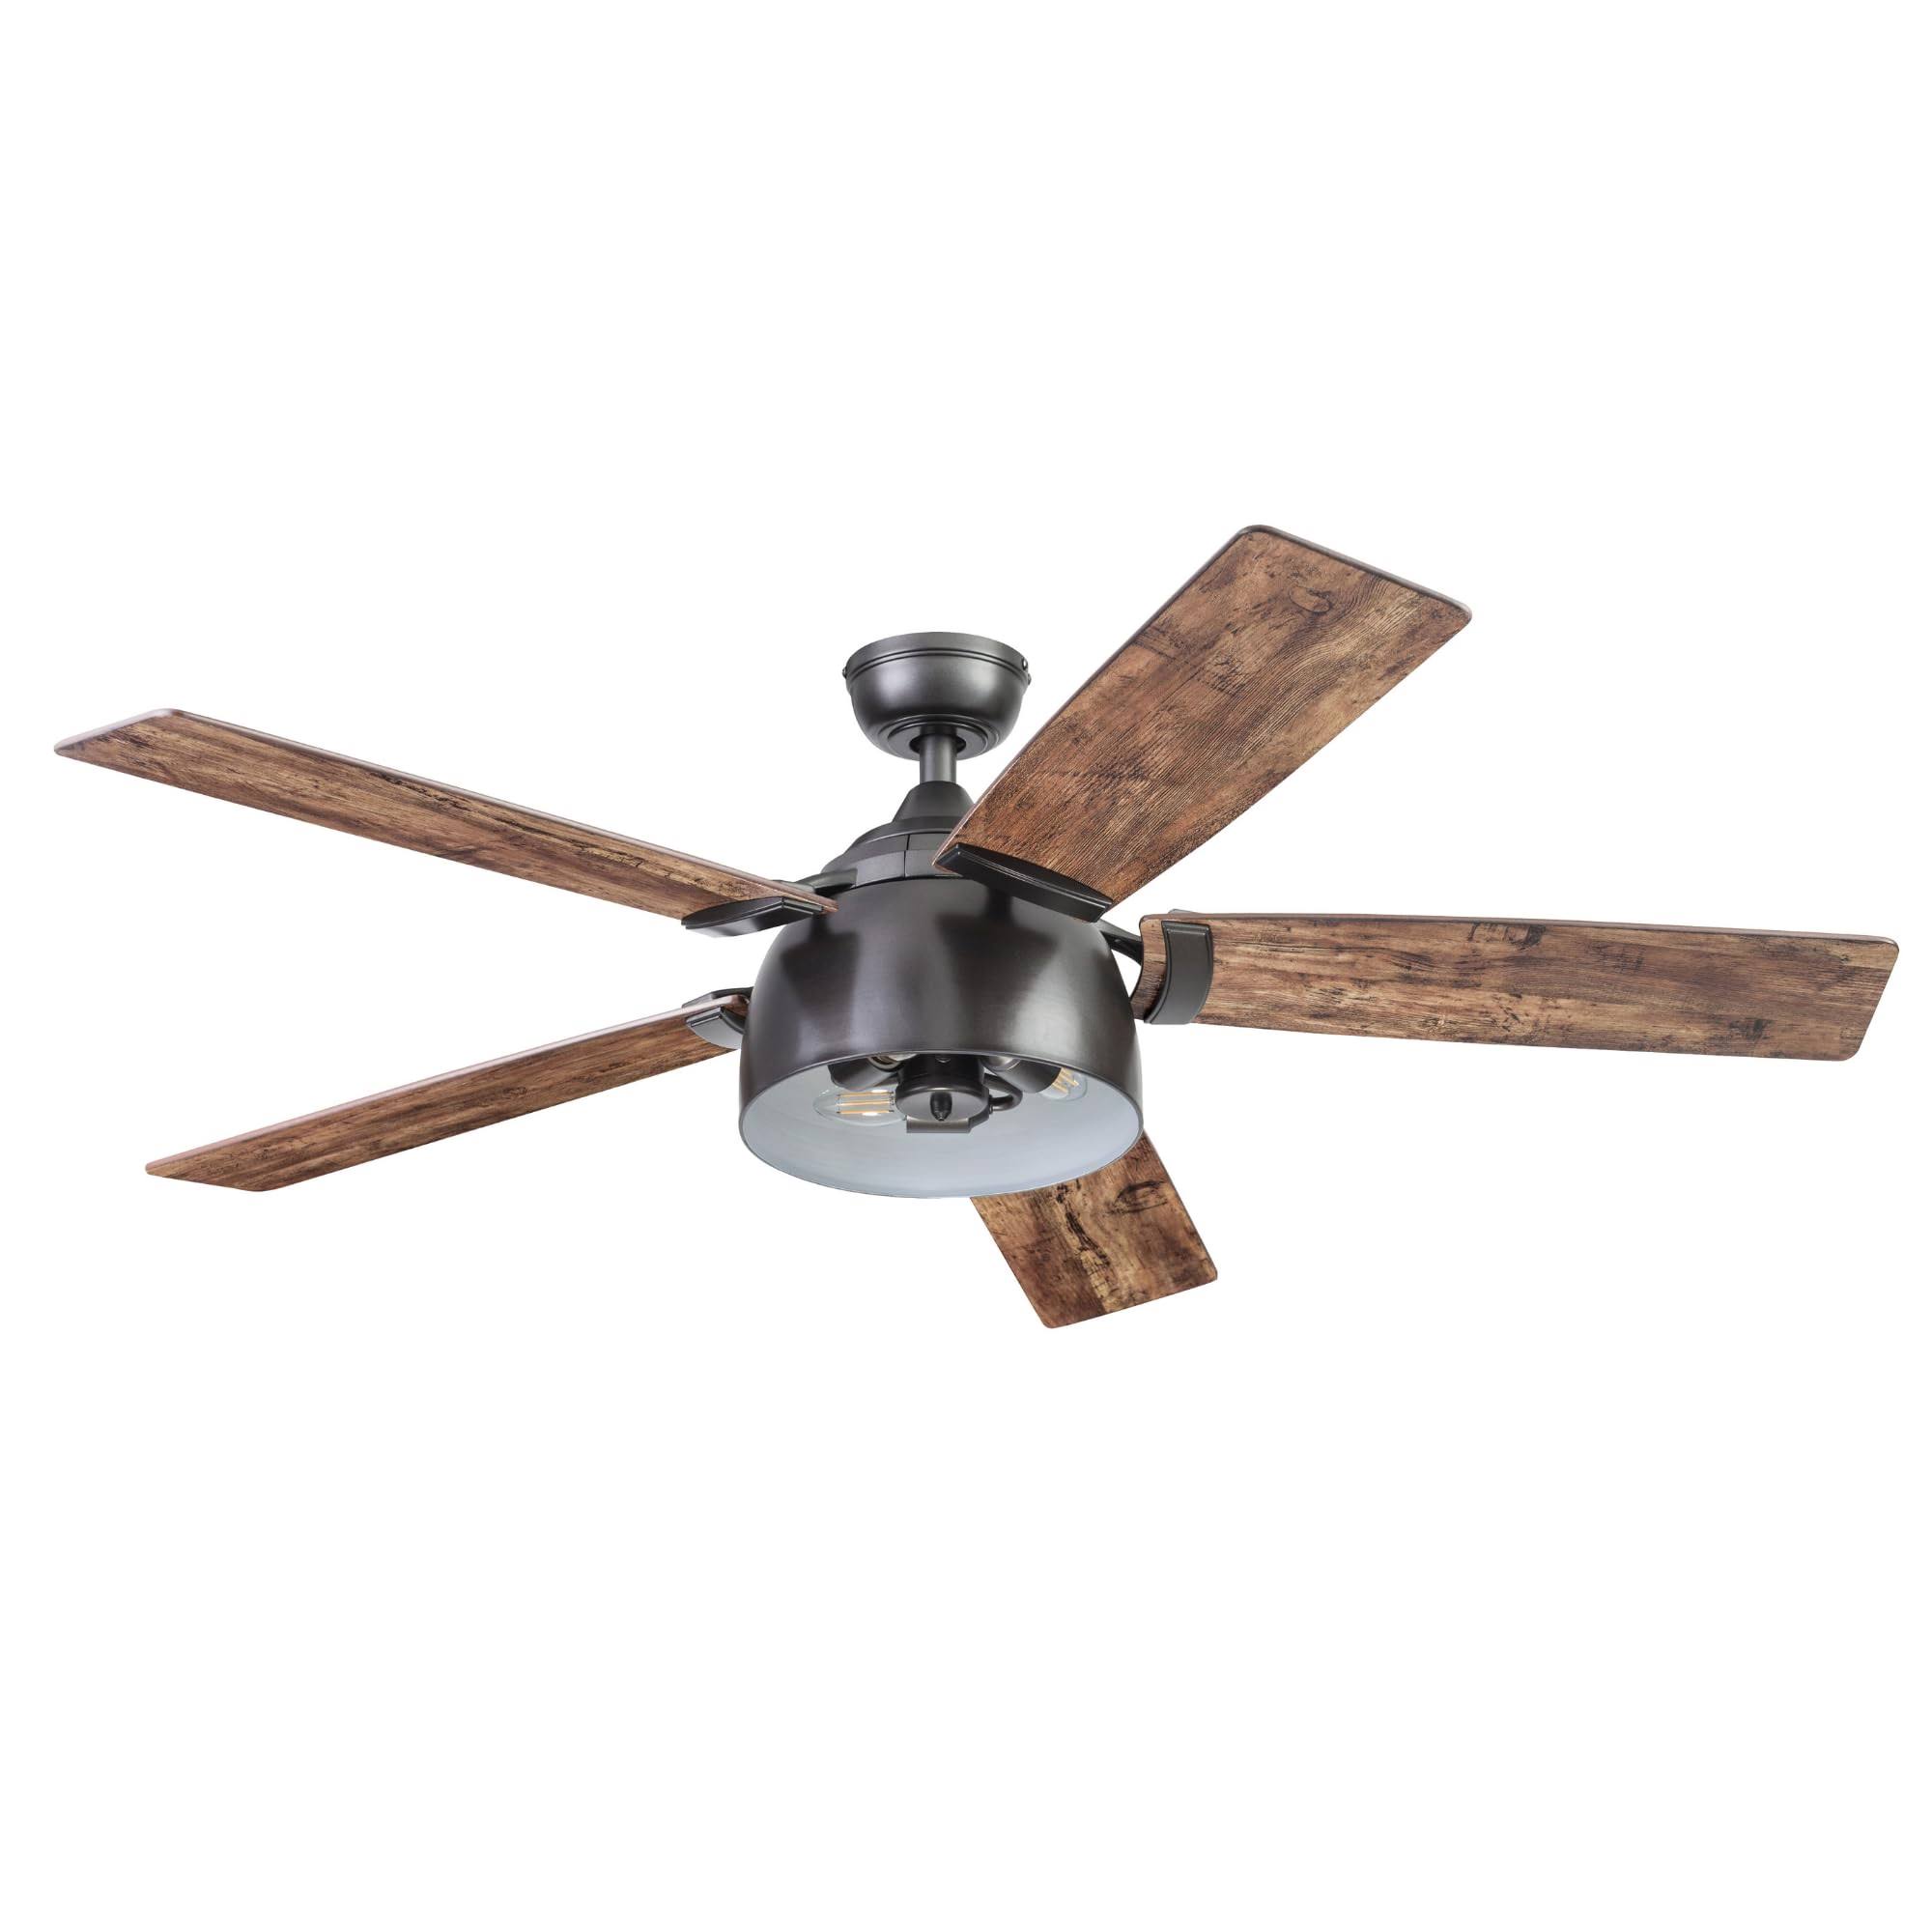 52" Octavia, Iron, Remote Control, Ceiling Fan | Prominence Home